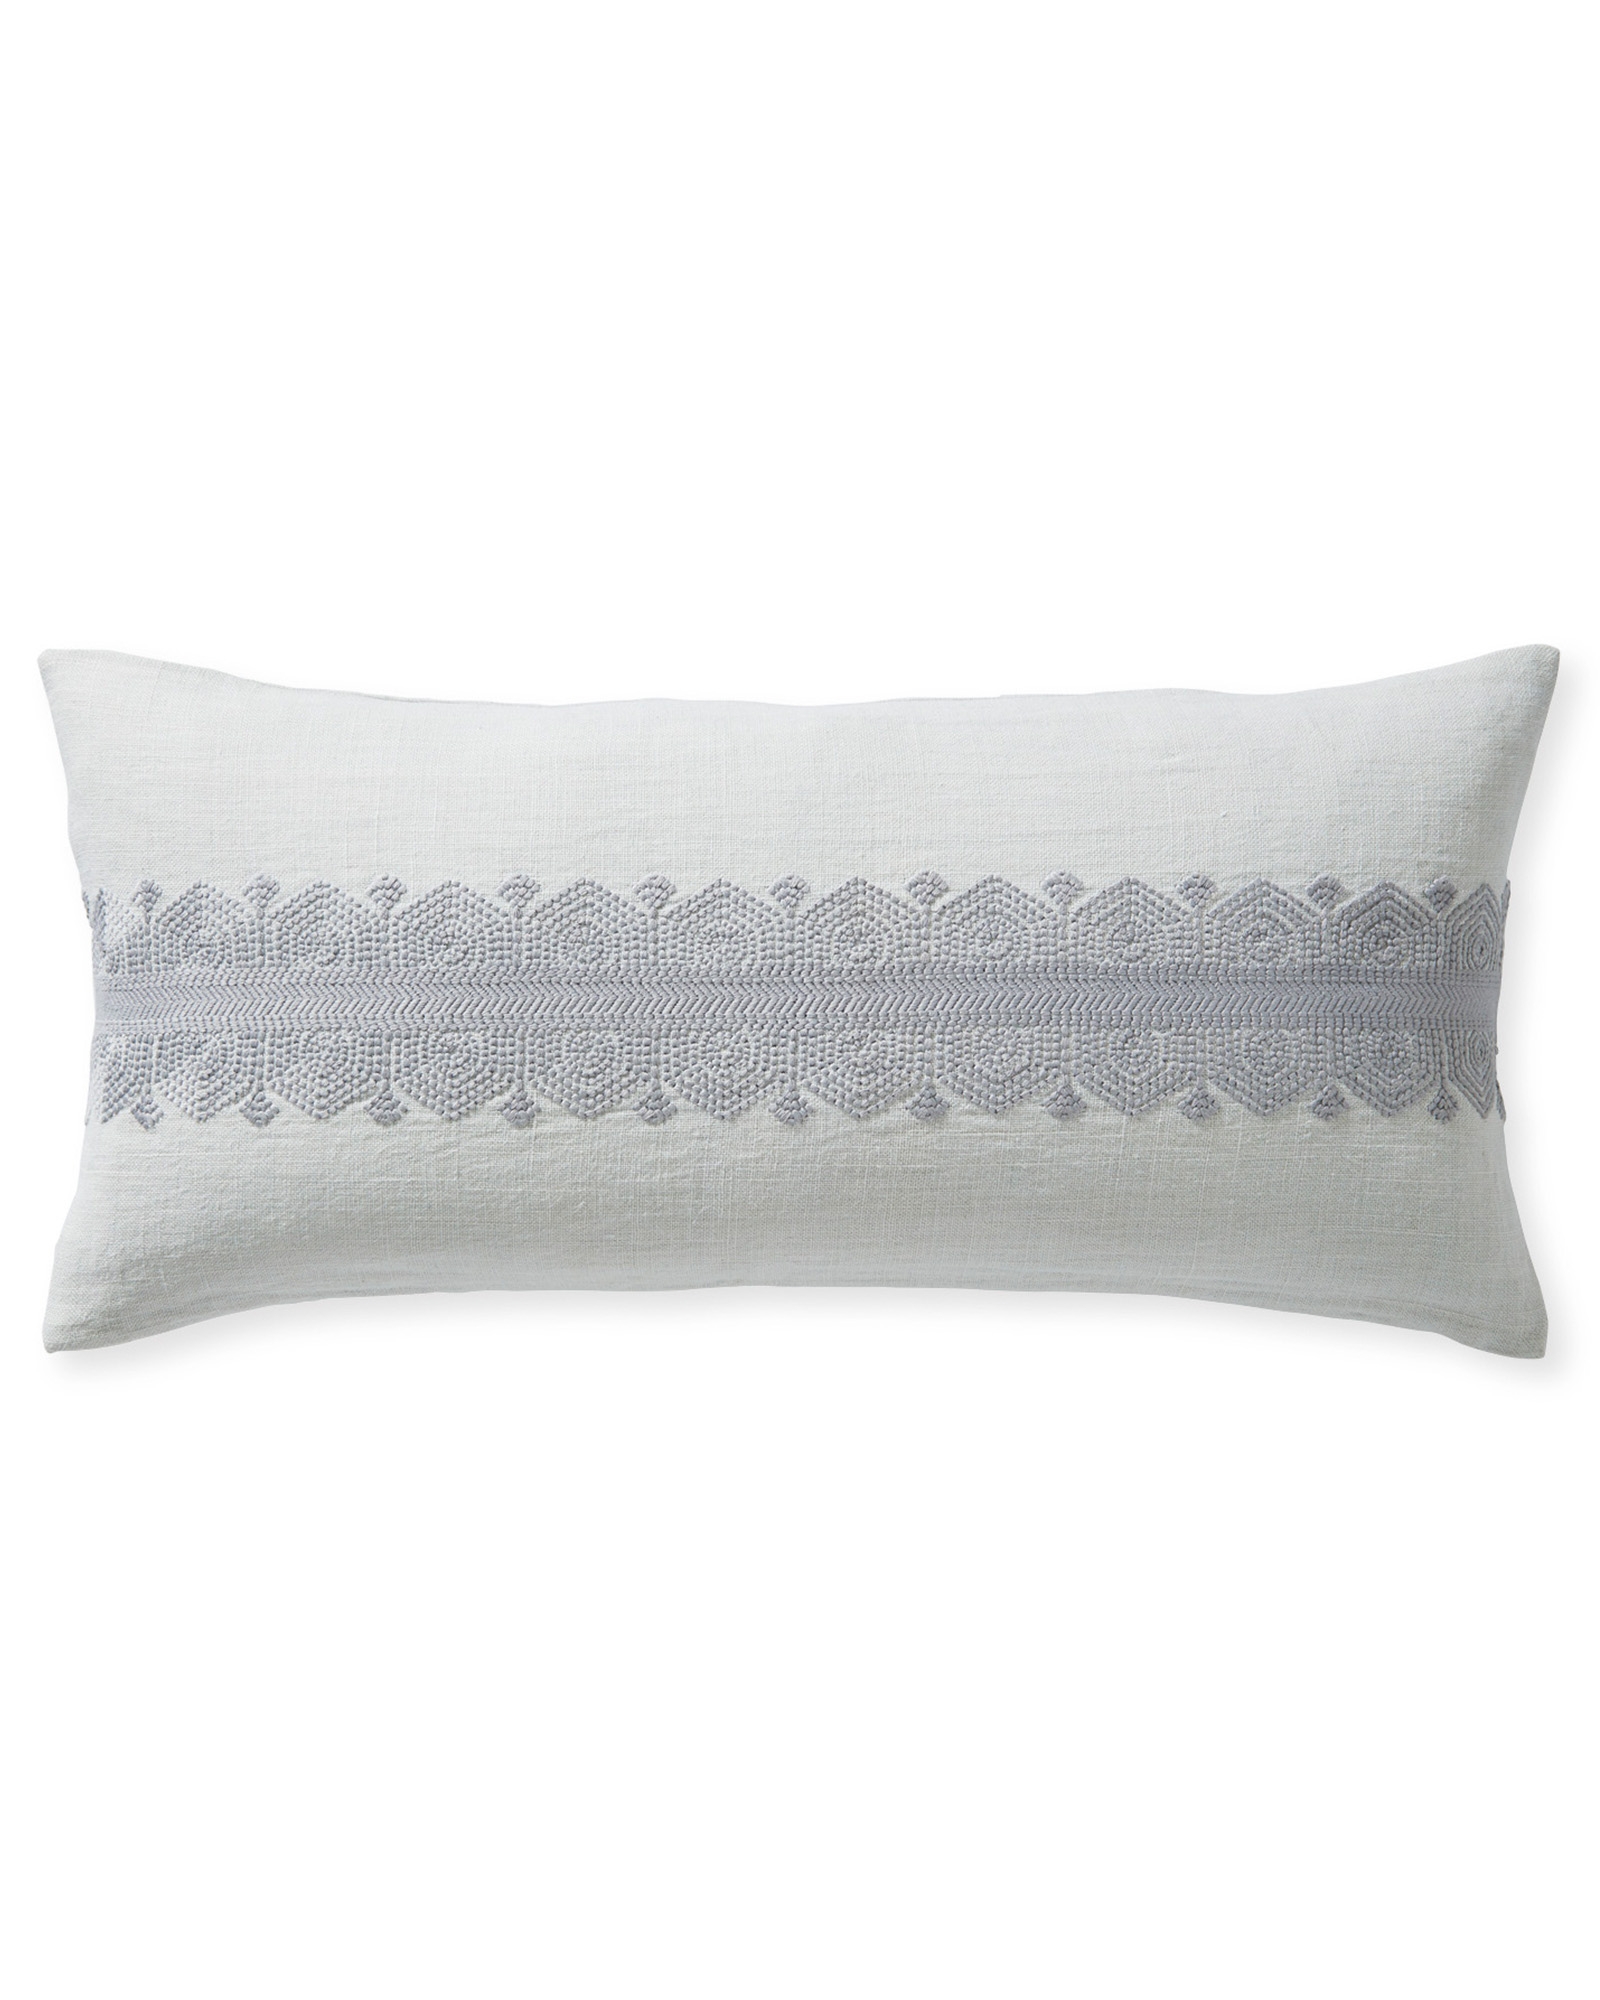 Olympia 14" x 30" Pillow Cover - Fog - Insert sold separately - Image 0